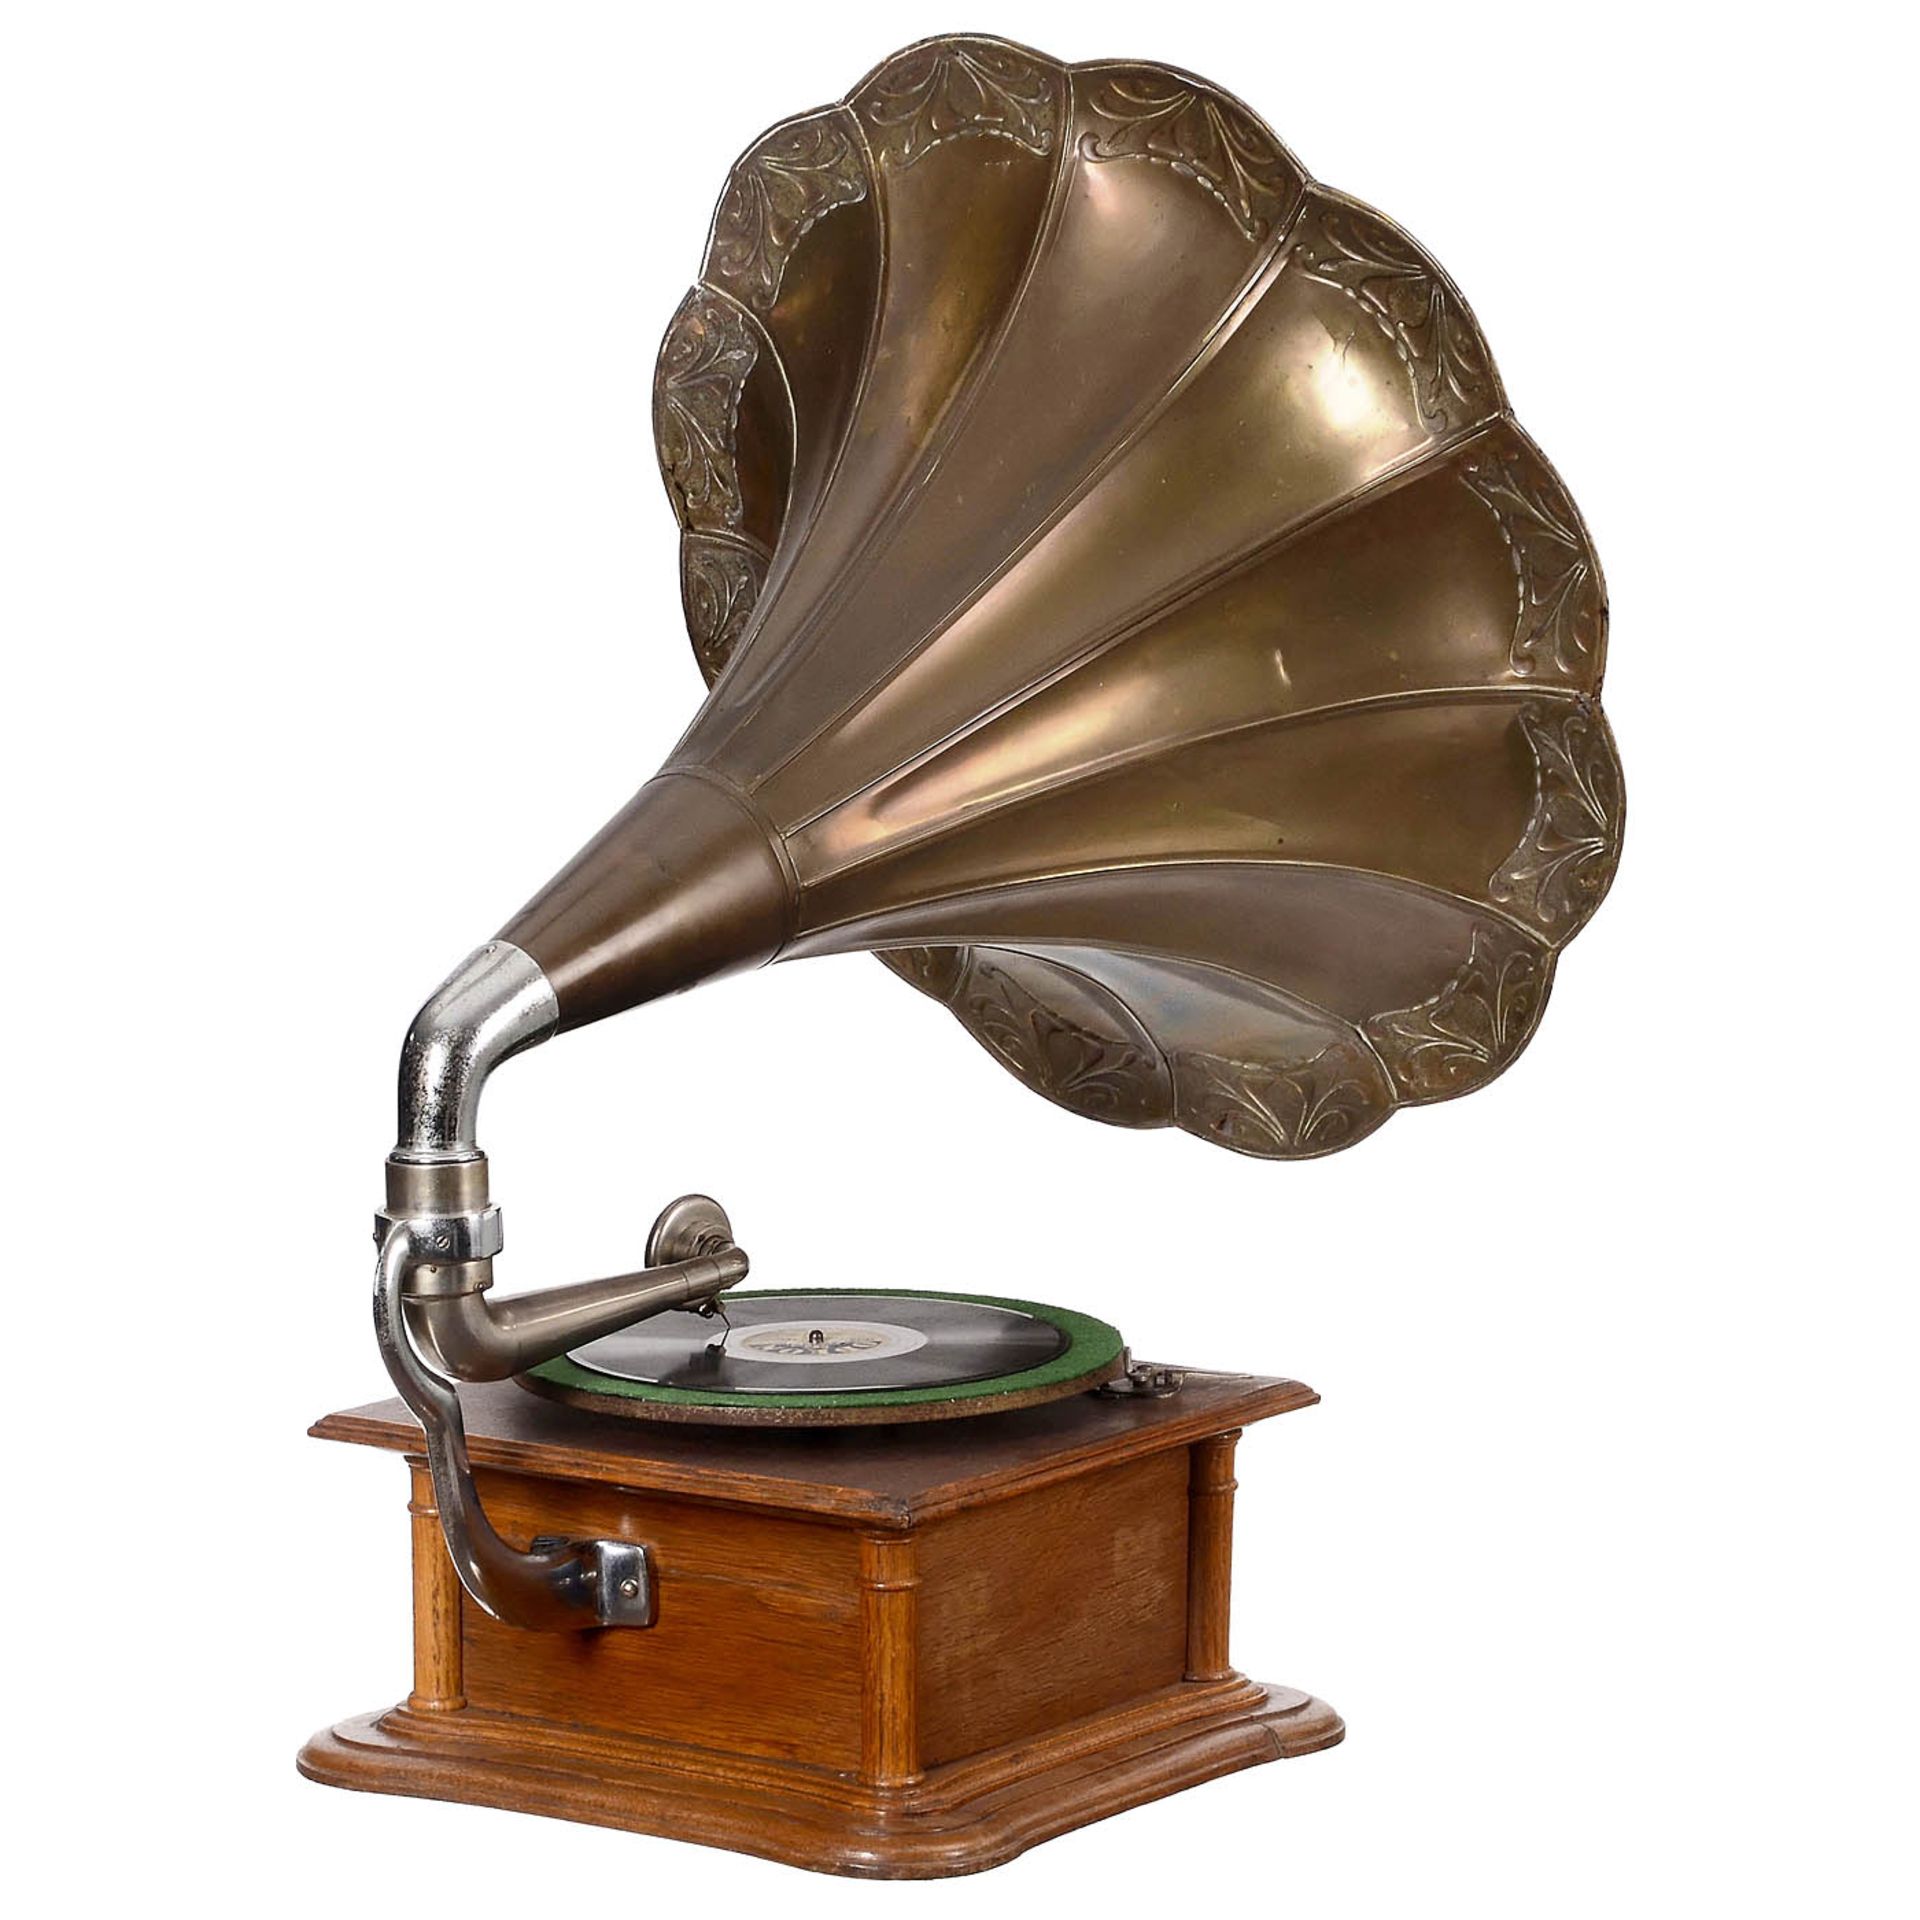 Gramophone with Brass Flower Horn, c. 1910 - Image 2 of 2